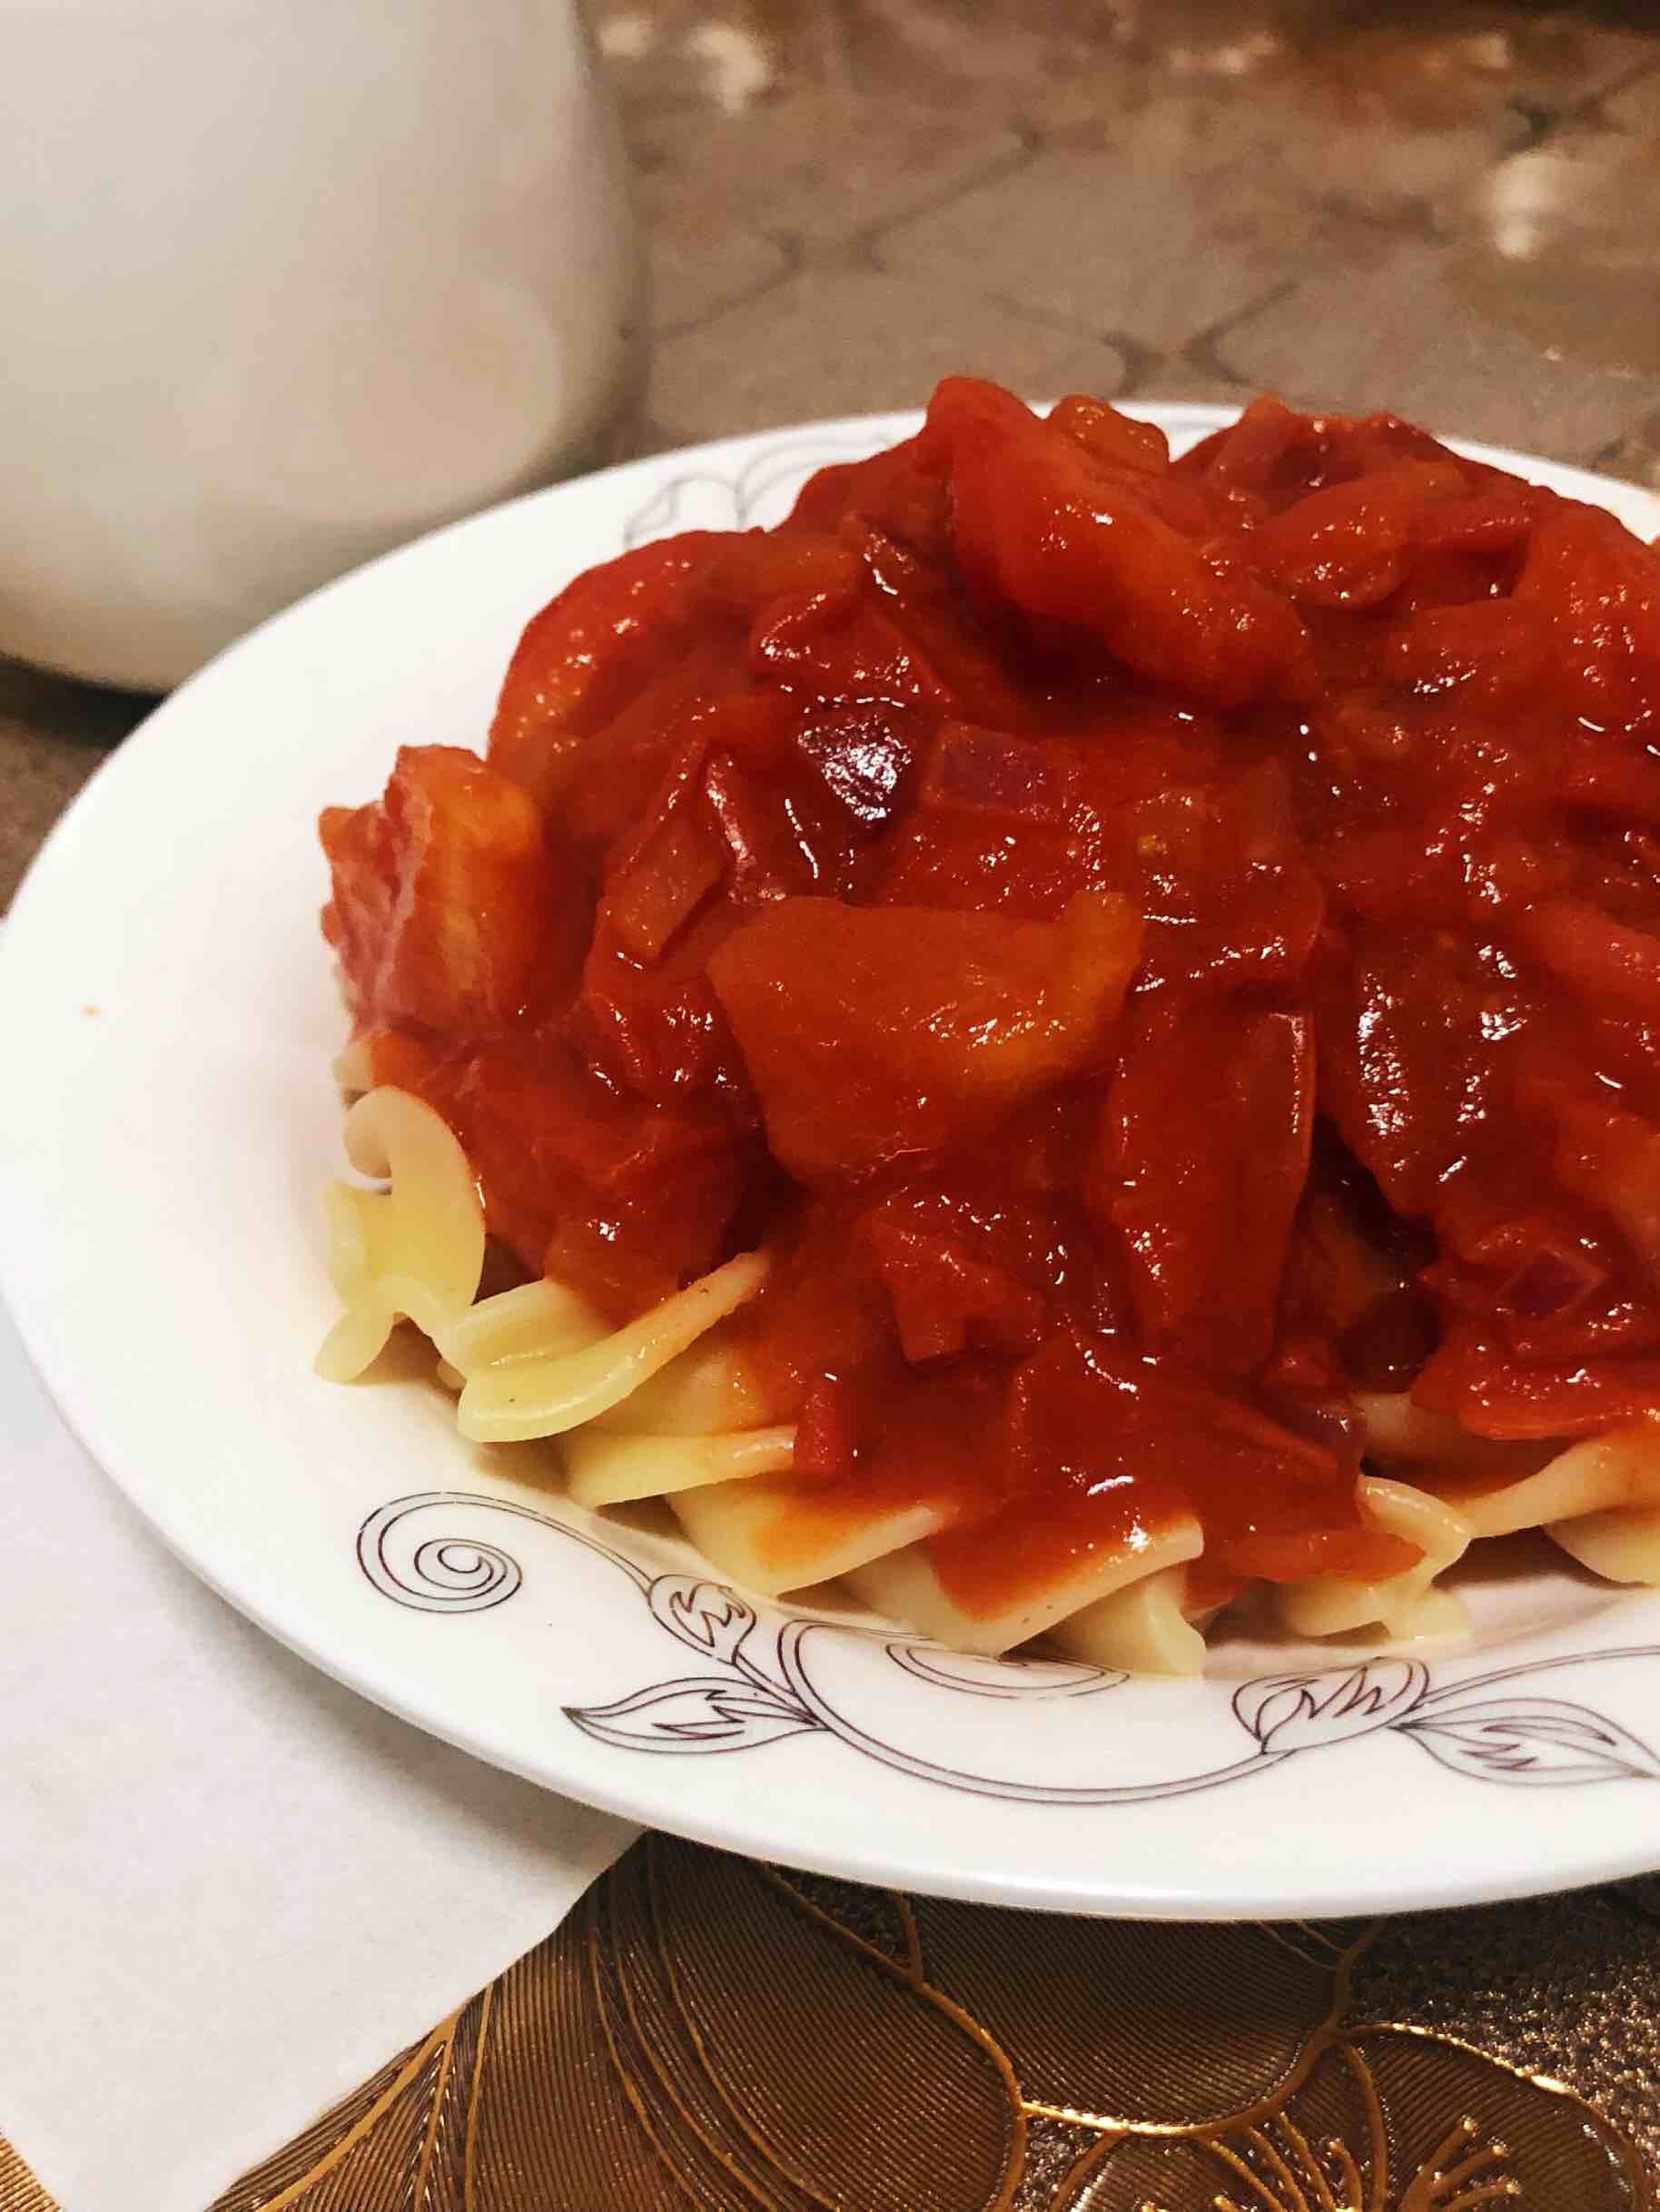 Spiral Pasta with Tomato Red Sauce recipe